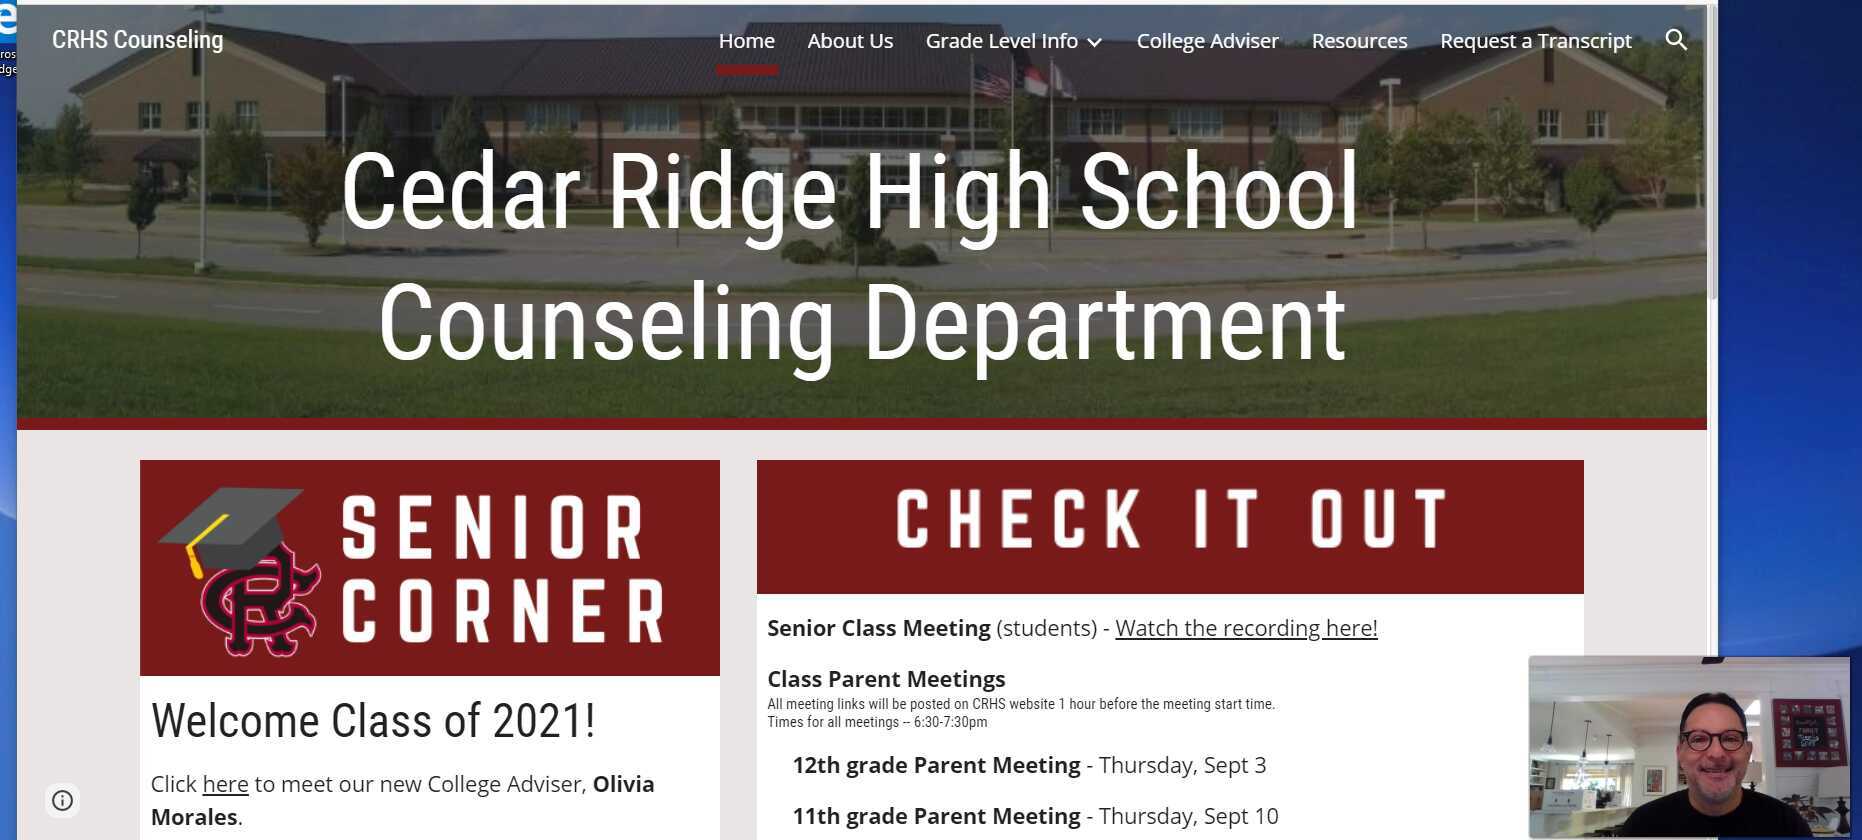 new counseling dept webpage